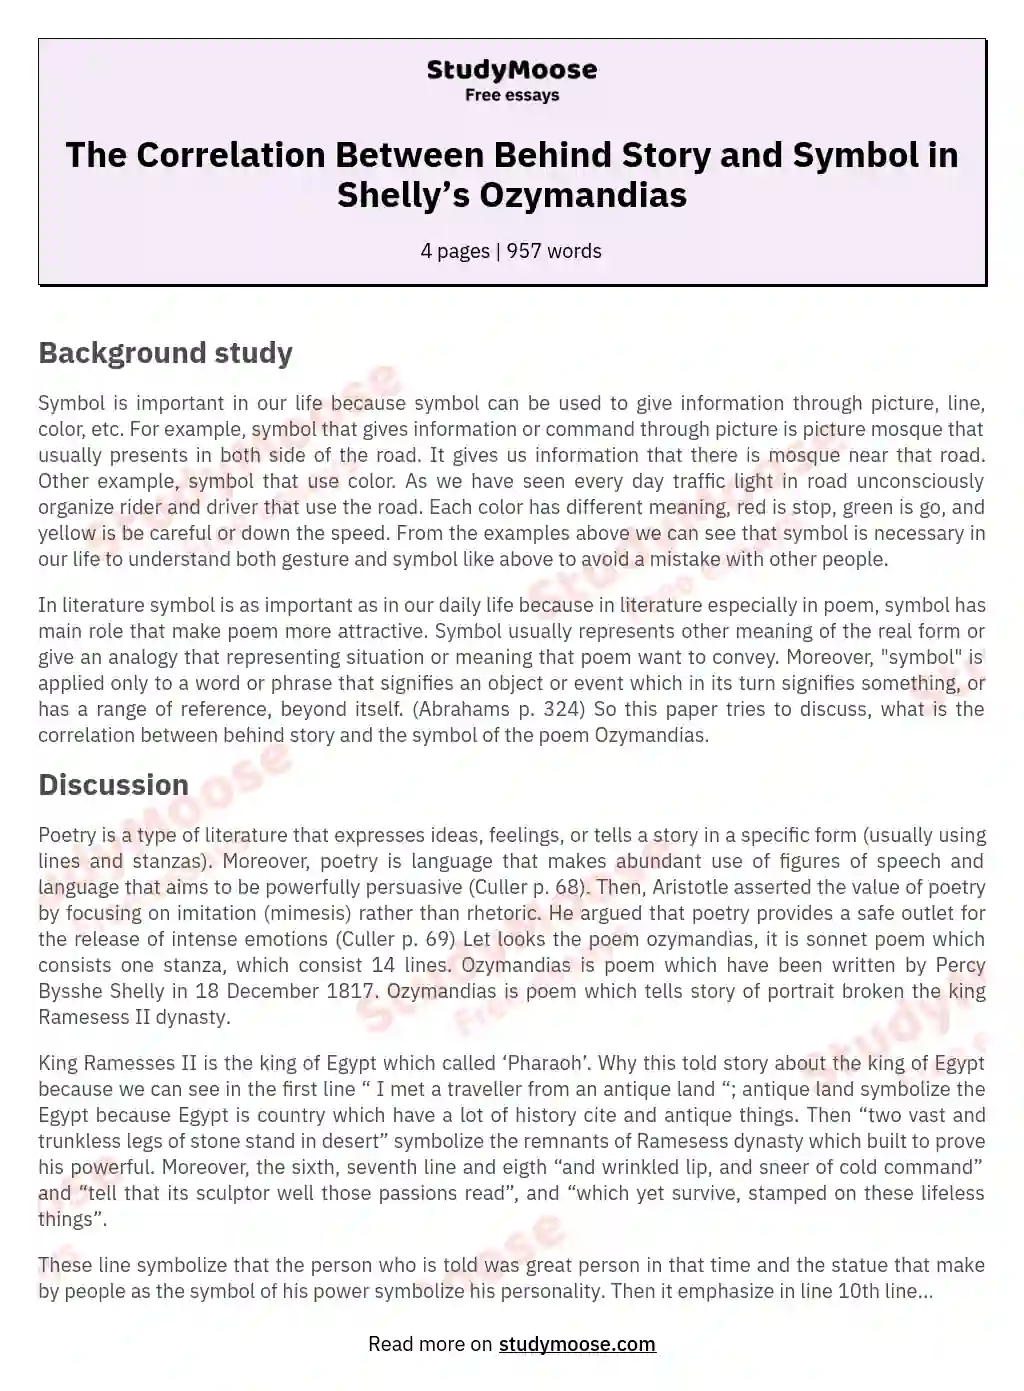 The Correlation Between Behind Story and Symbol in Shelly’s Ozymandias